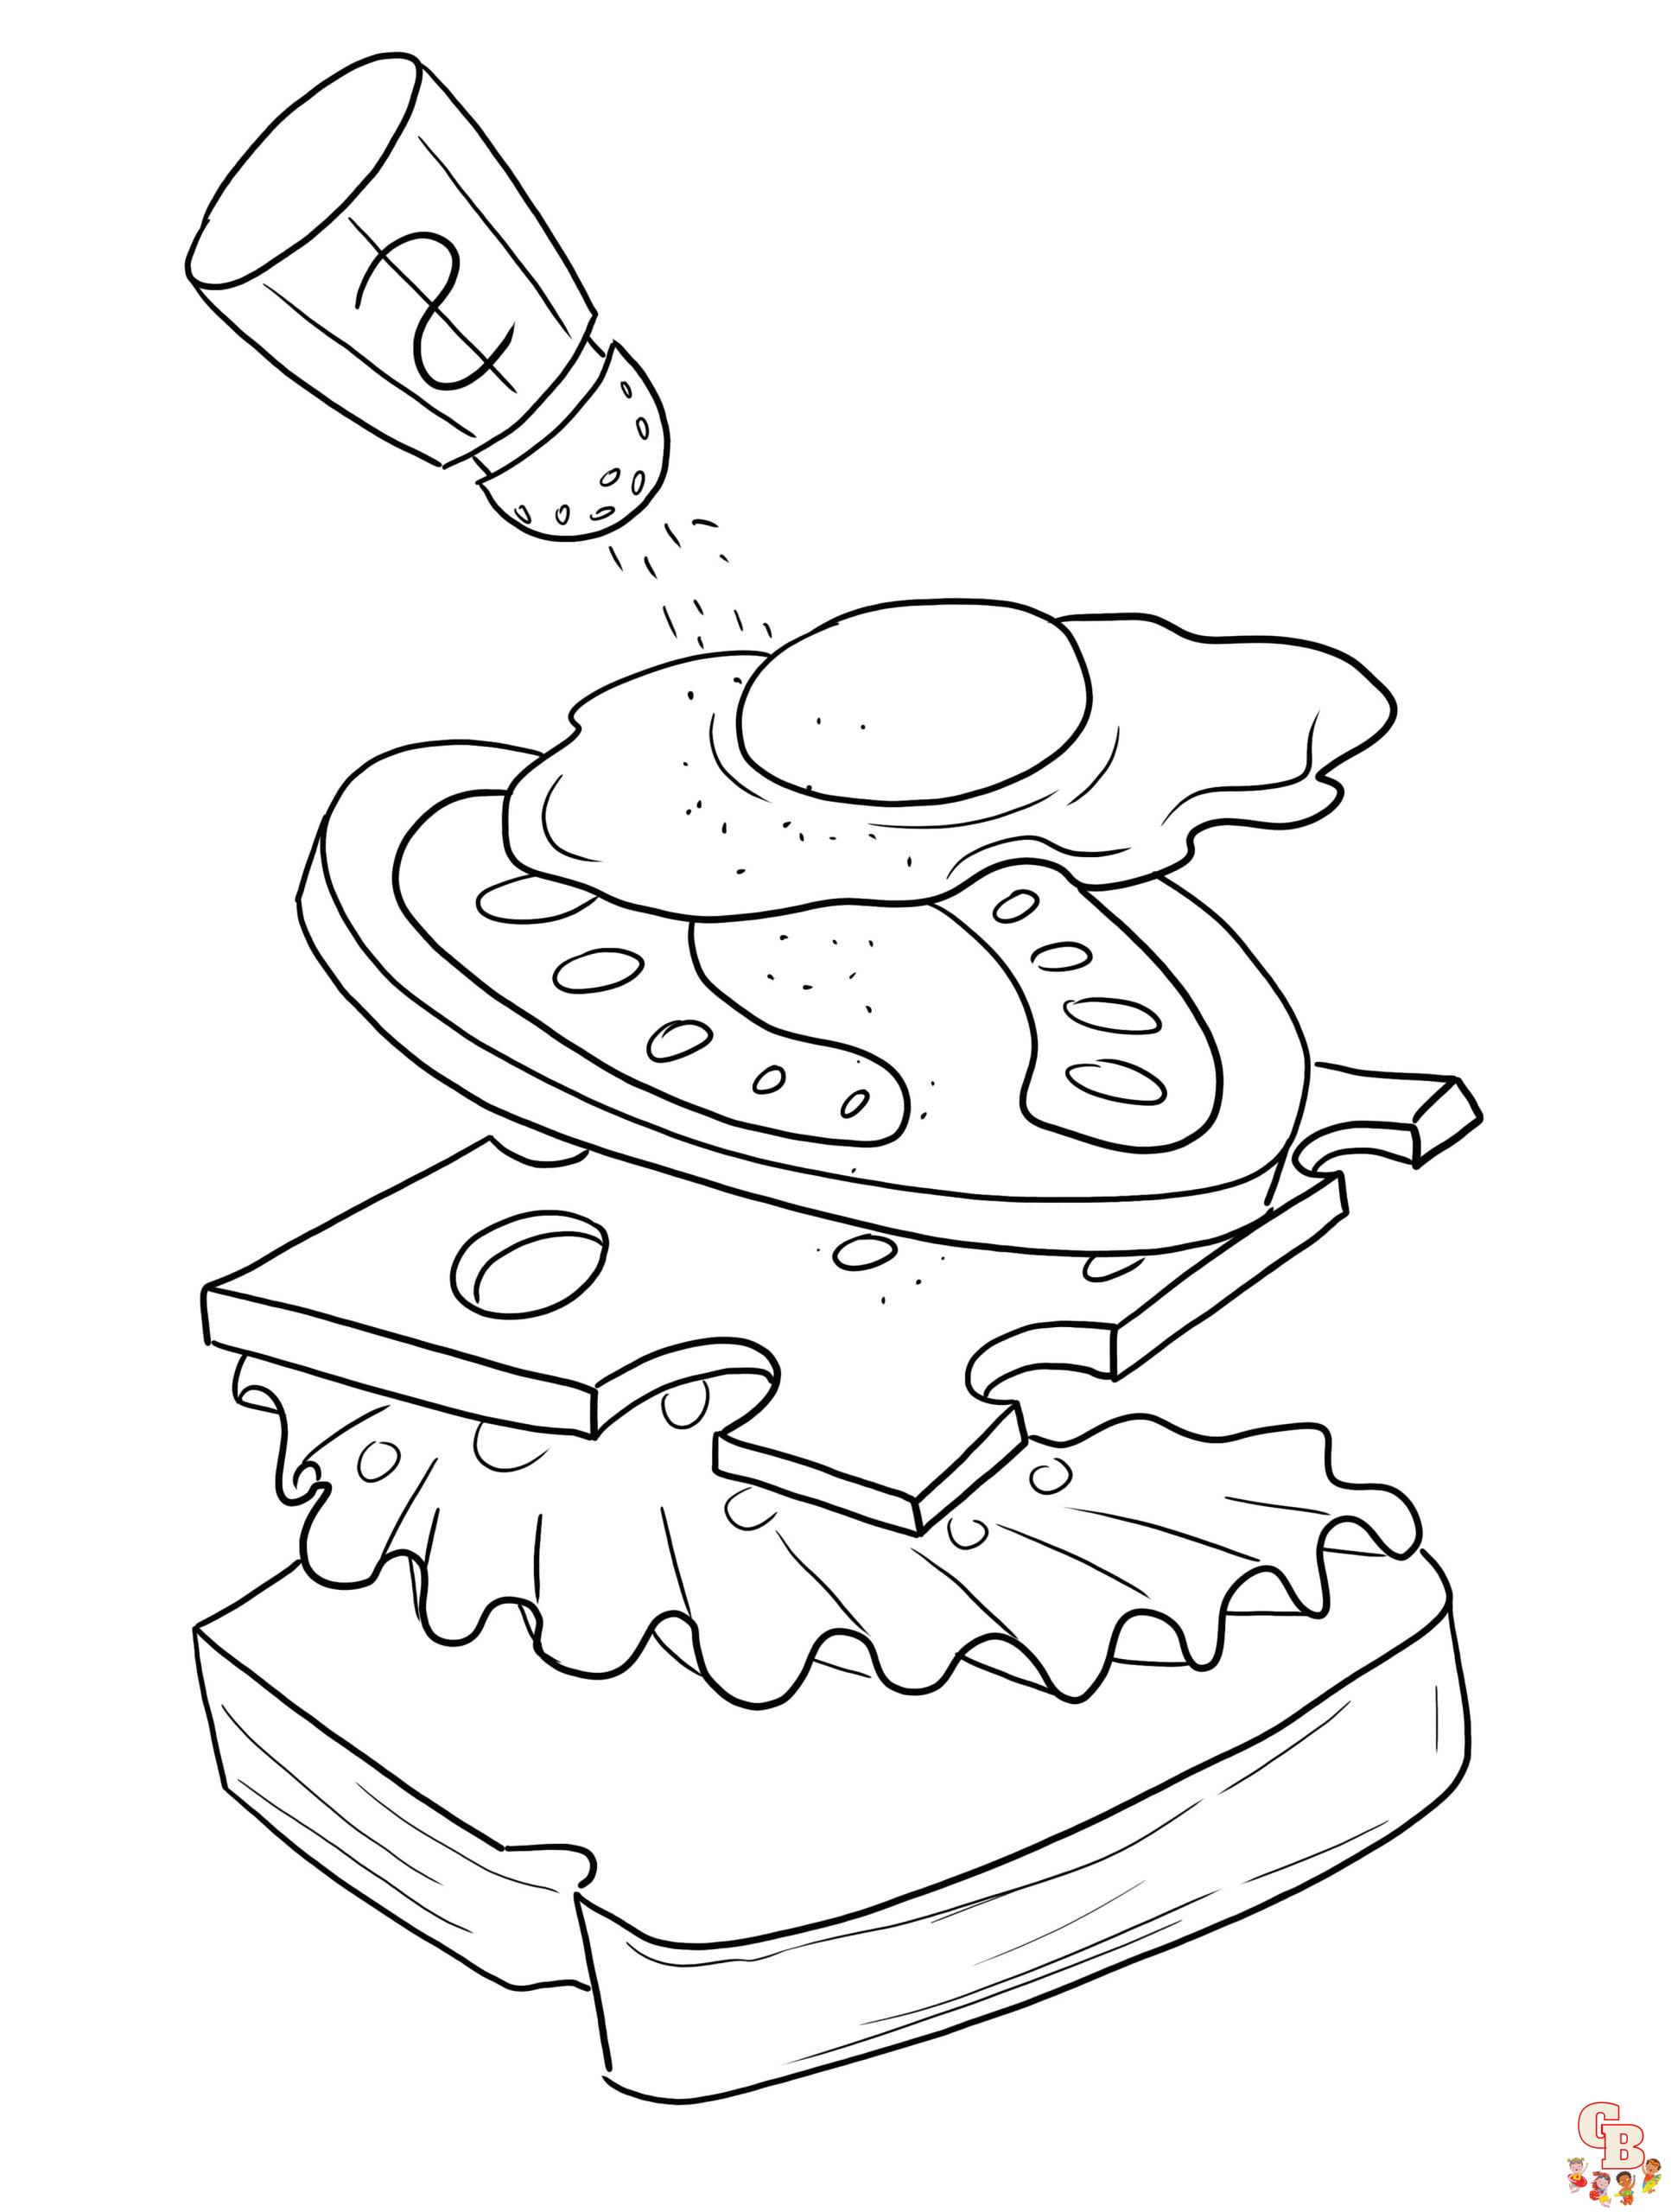 Free Sandwich coloring pages for kids